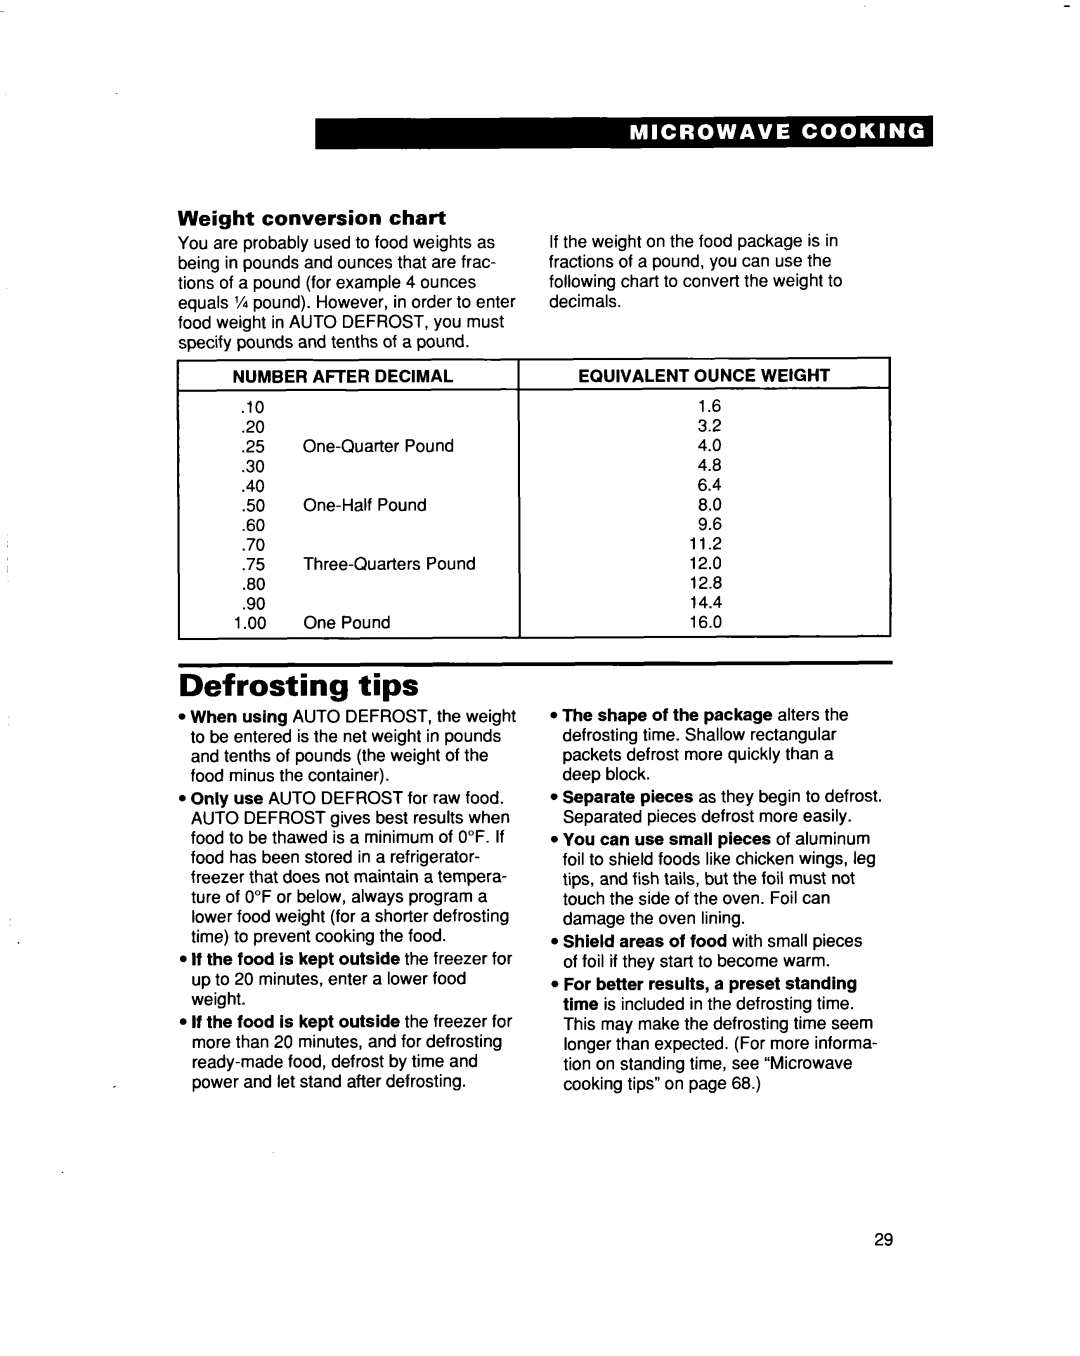 Whirlpool MH9115XB warranty Defrosting tips, Weight conversion chart 